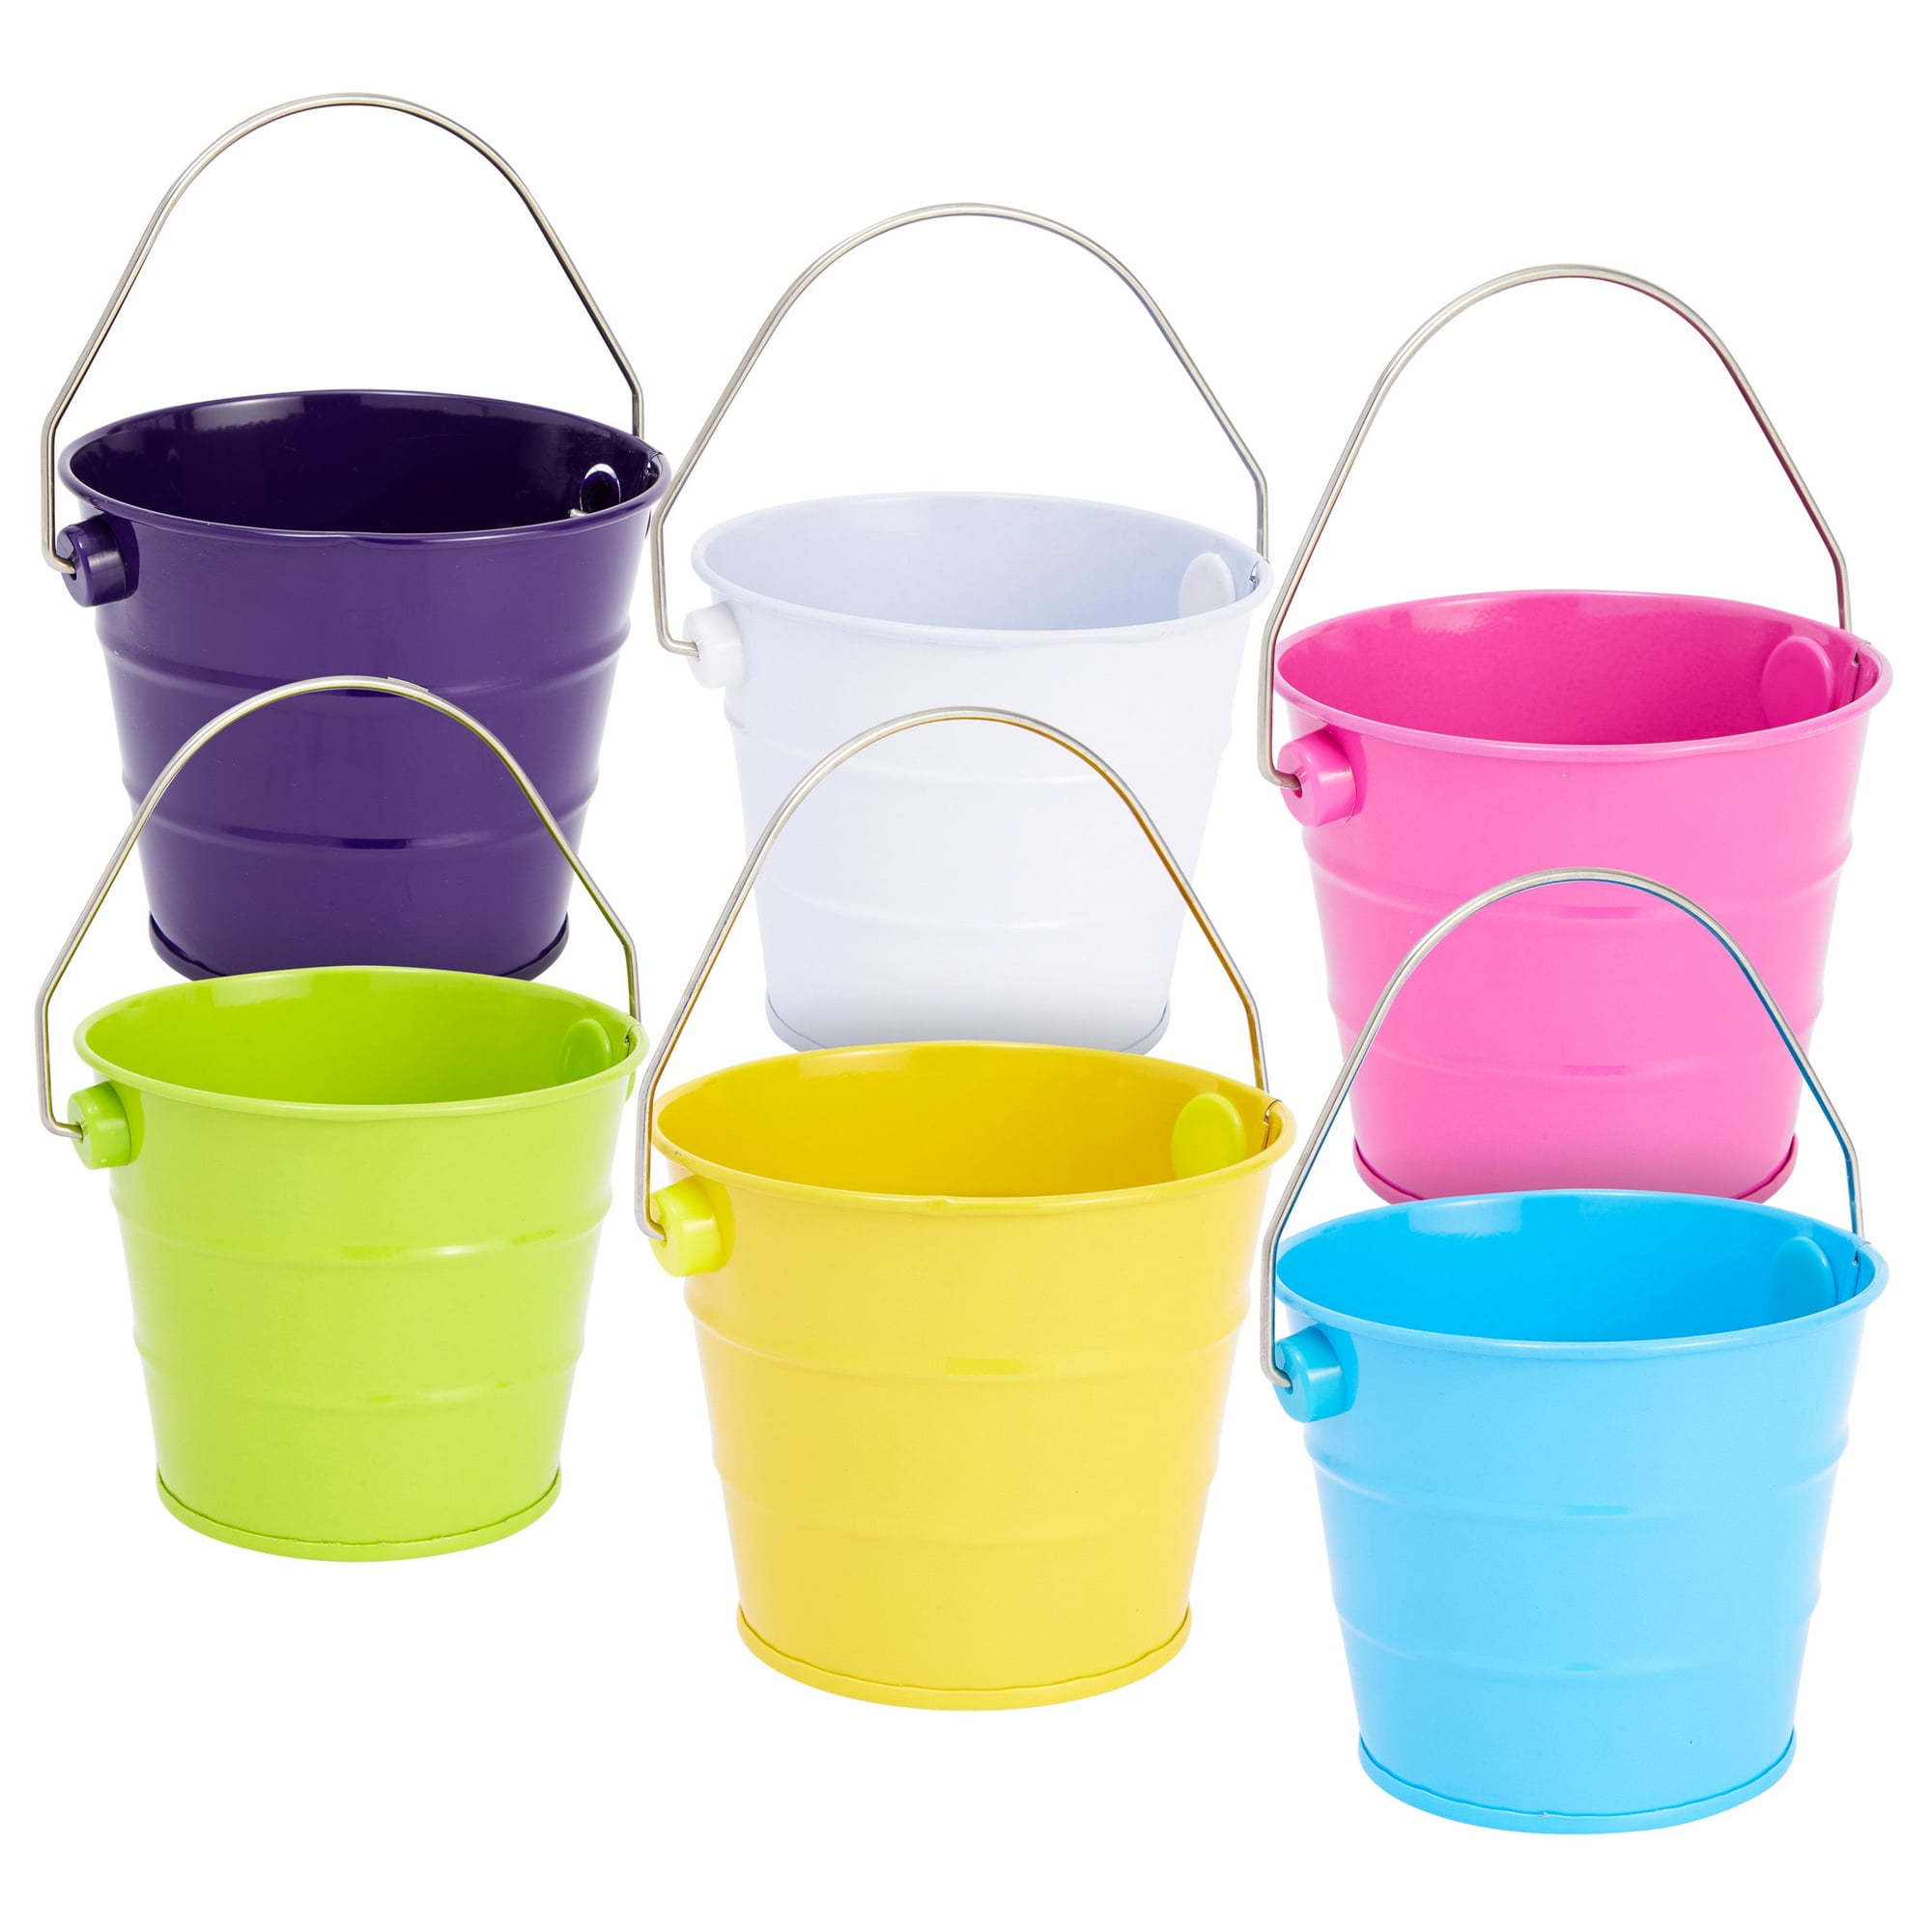 Baby Shower Buckets - Small Round Pails